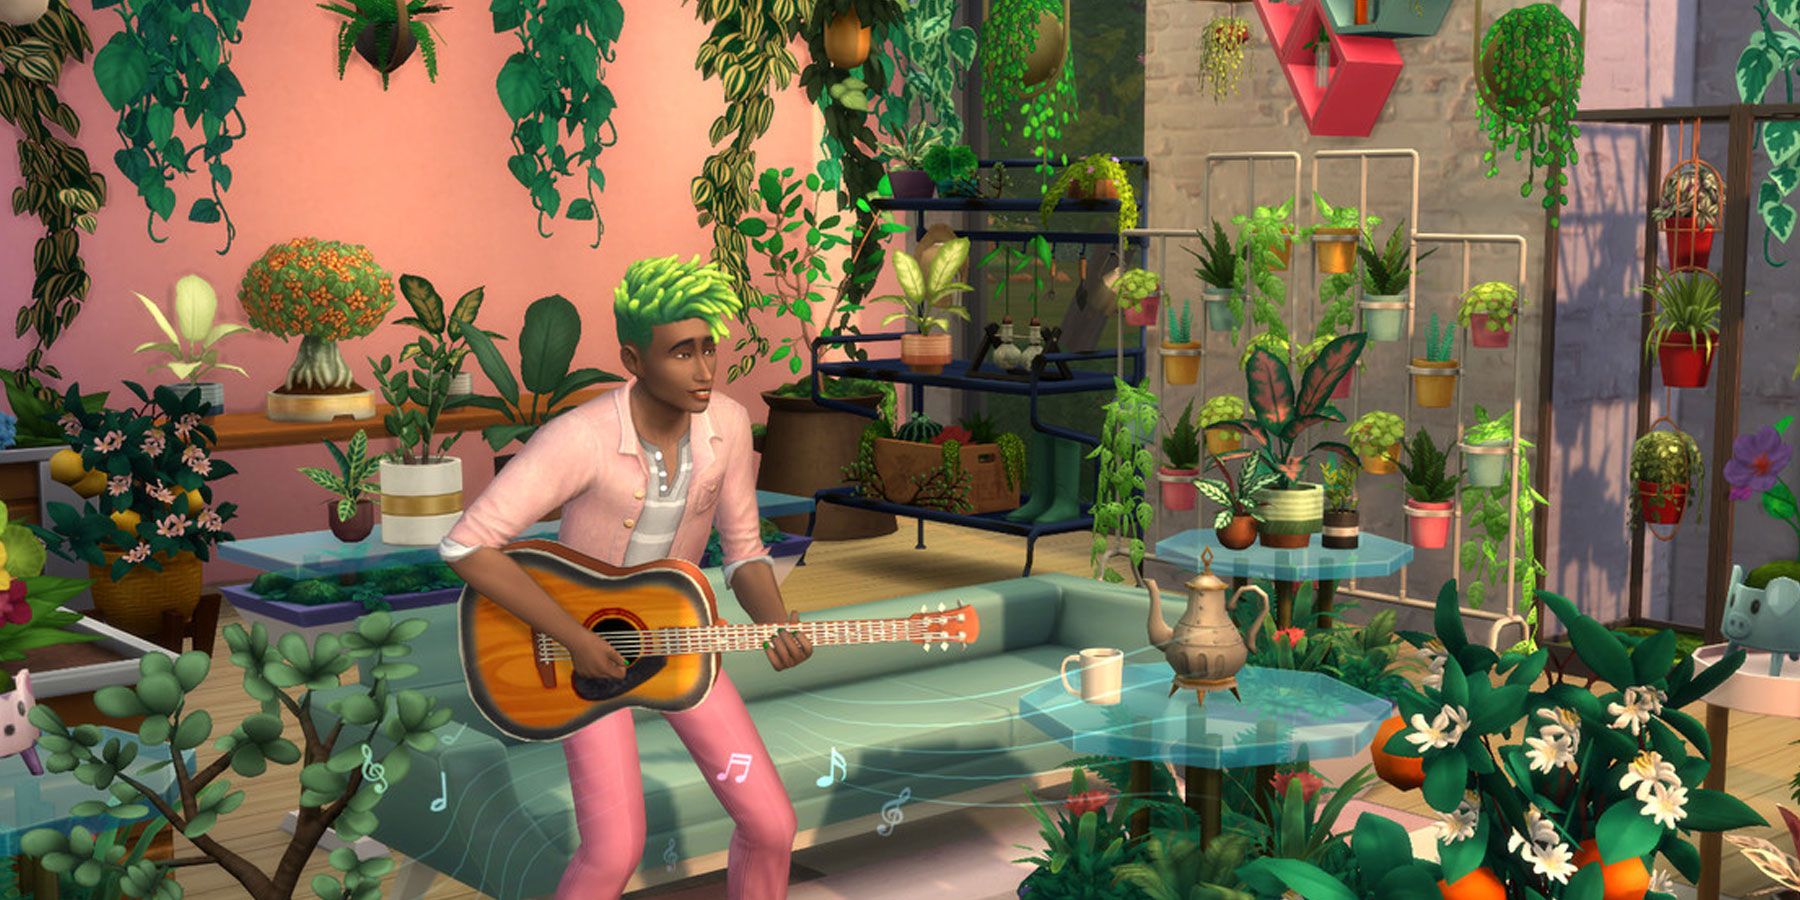 the-sims-4-sim-with-green-hair-playing-guitar-in-room-full-of-plants-from-new-dlc